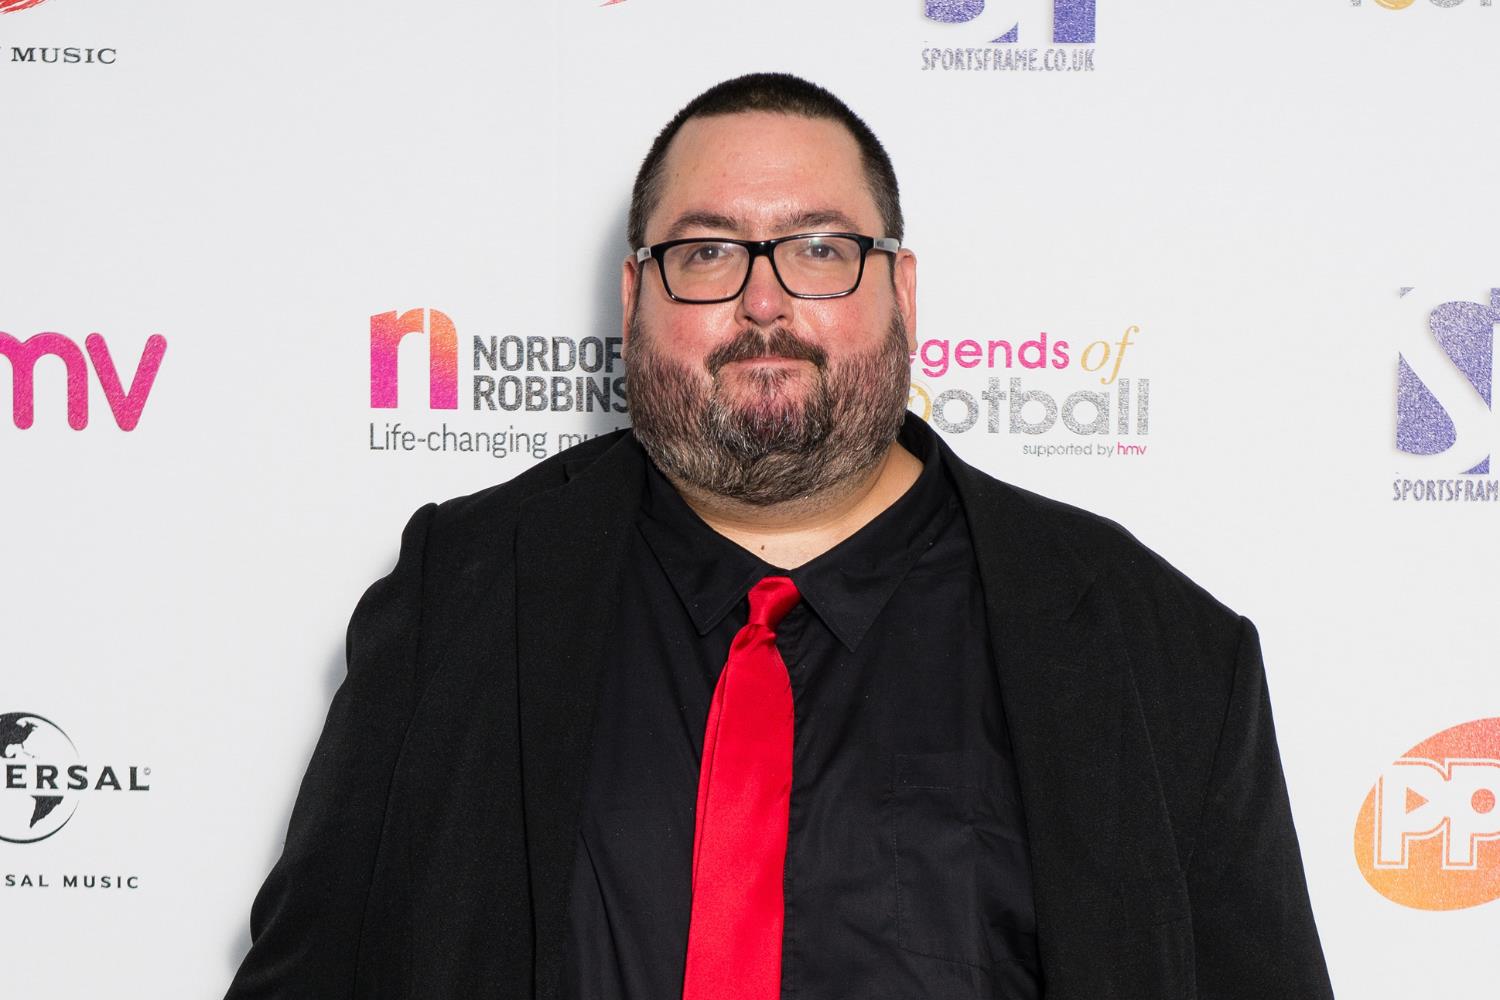 ewen macintosh who played keith in the office and studied in edinburgh has died aged 50